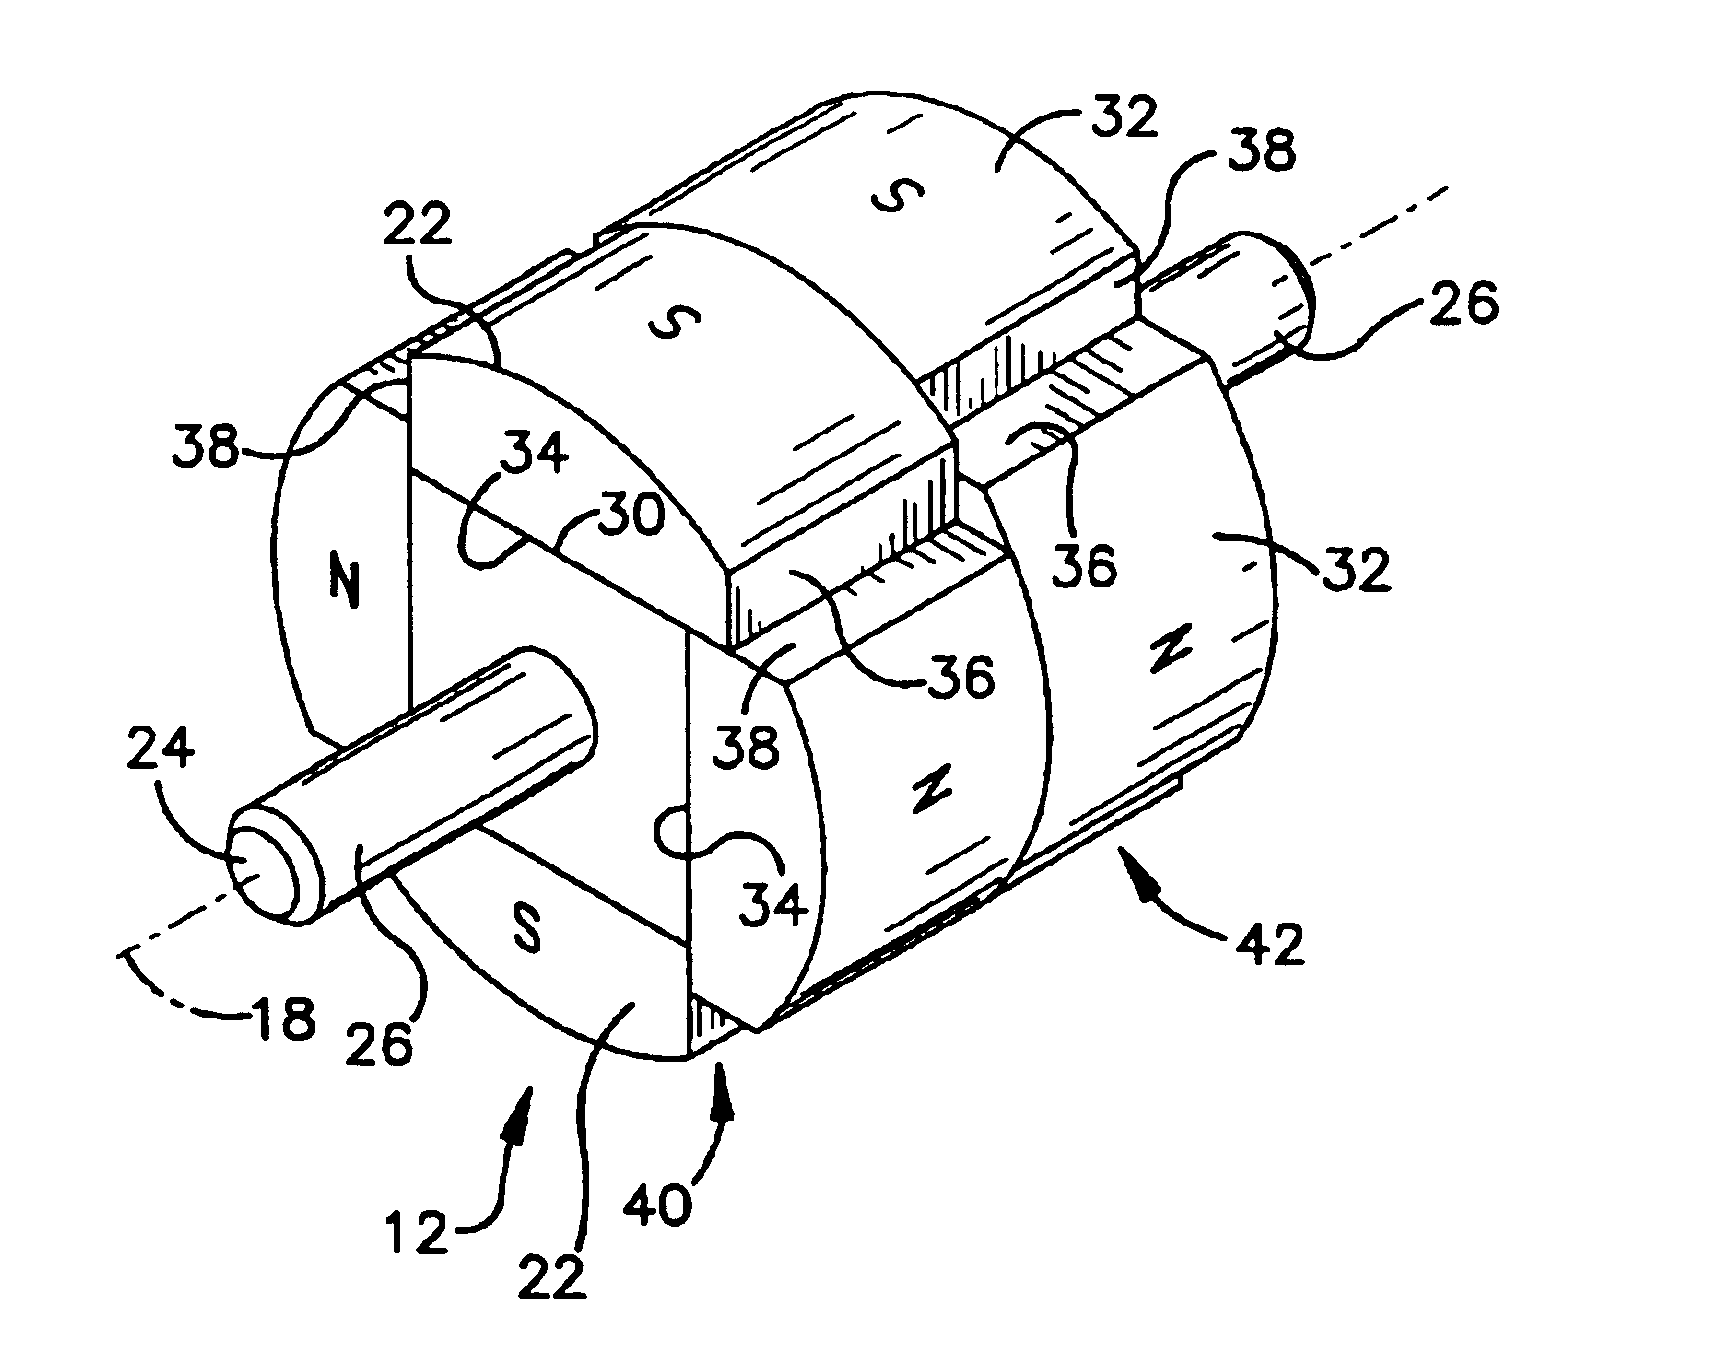 Brushless DC motor with stepped skewed rotor